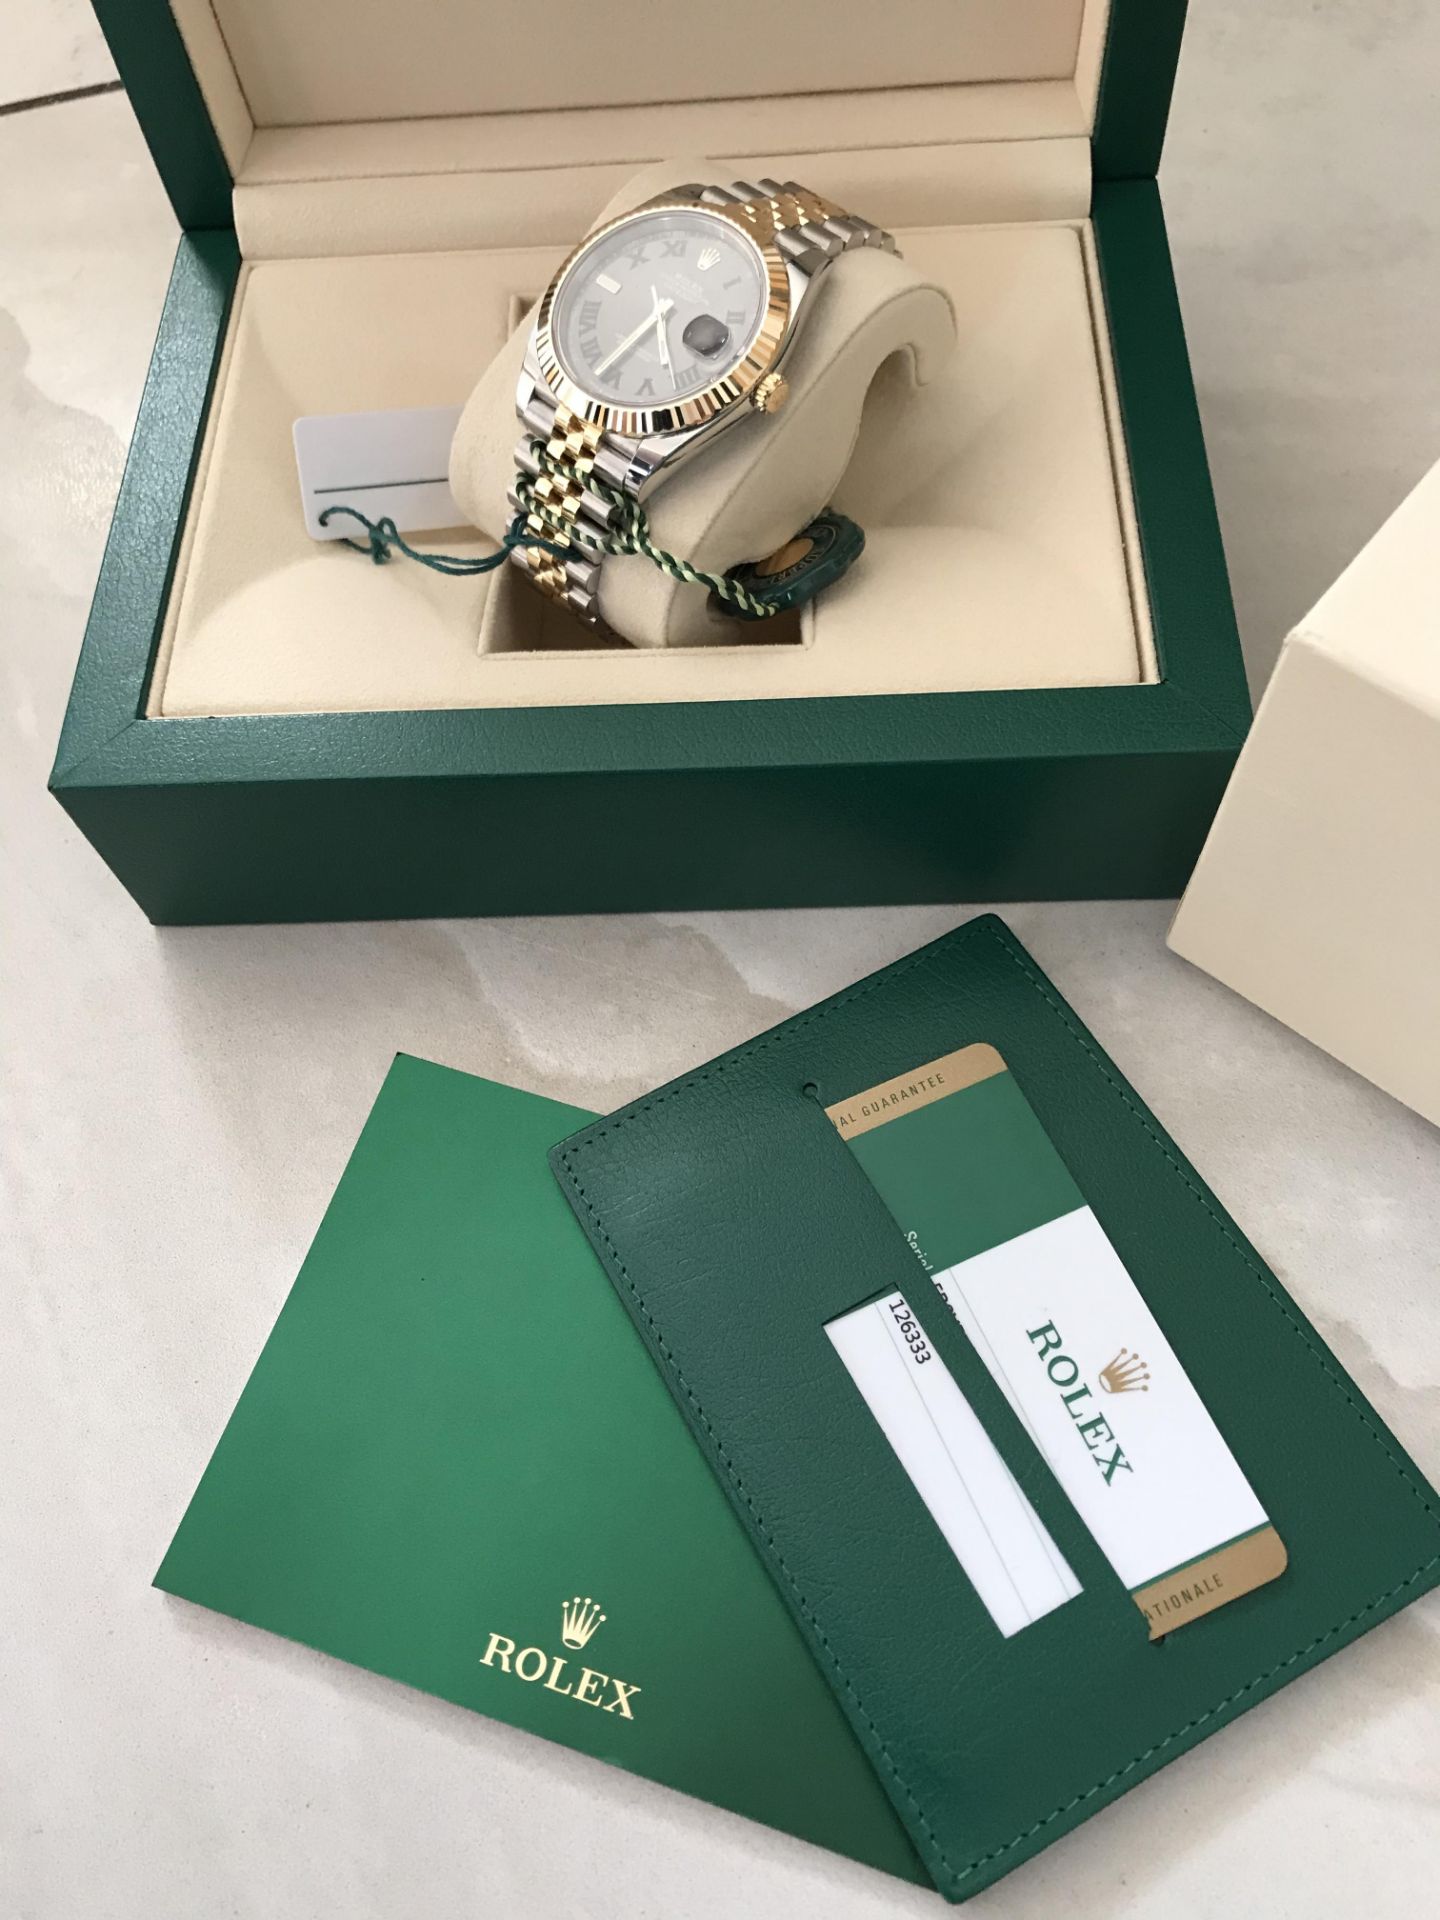 2019 ROLEX GOLD JUBILEE BIMETAL WIMBLEDON DATE JUST 41 OYSTER 41 MM OYSTERSTEEL AND YELLOW GOLD - Image 11 of 12